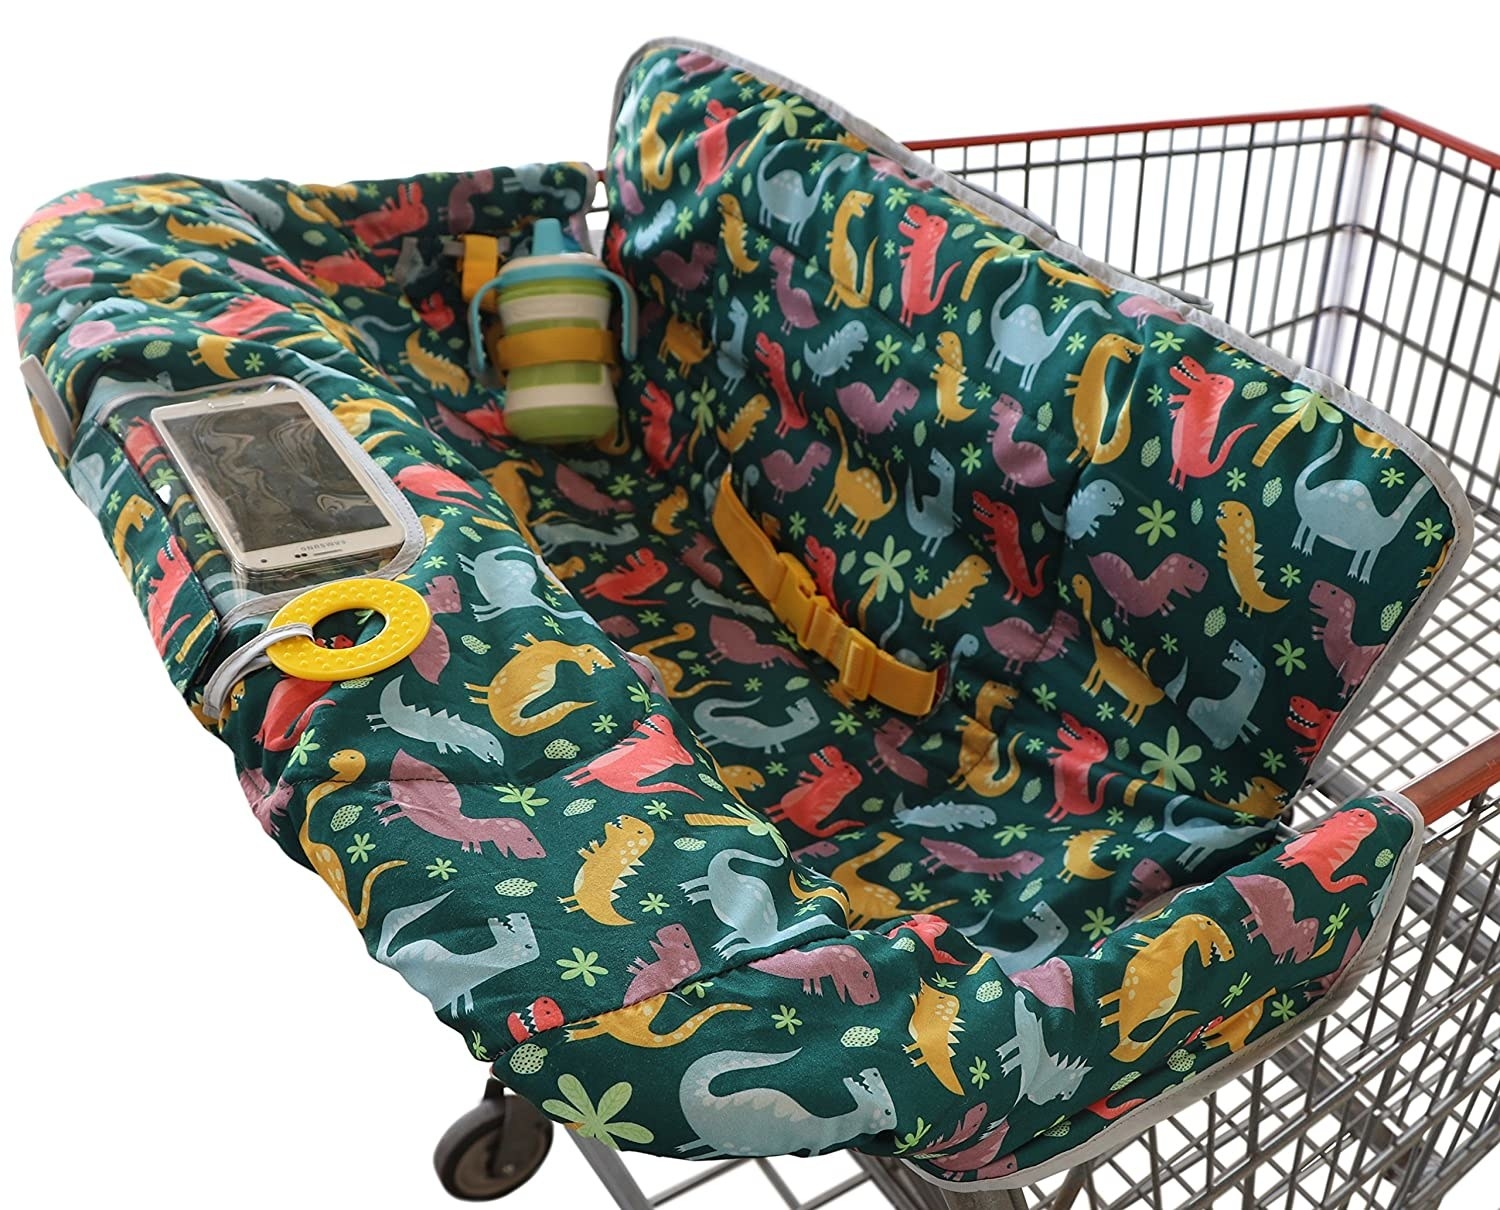 the shopping cart cover with dinosaurs on it